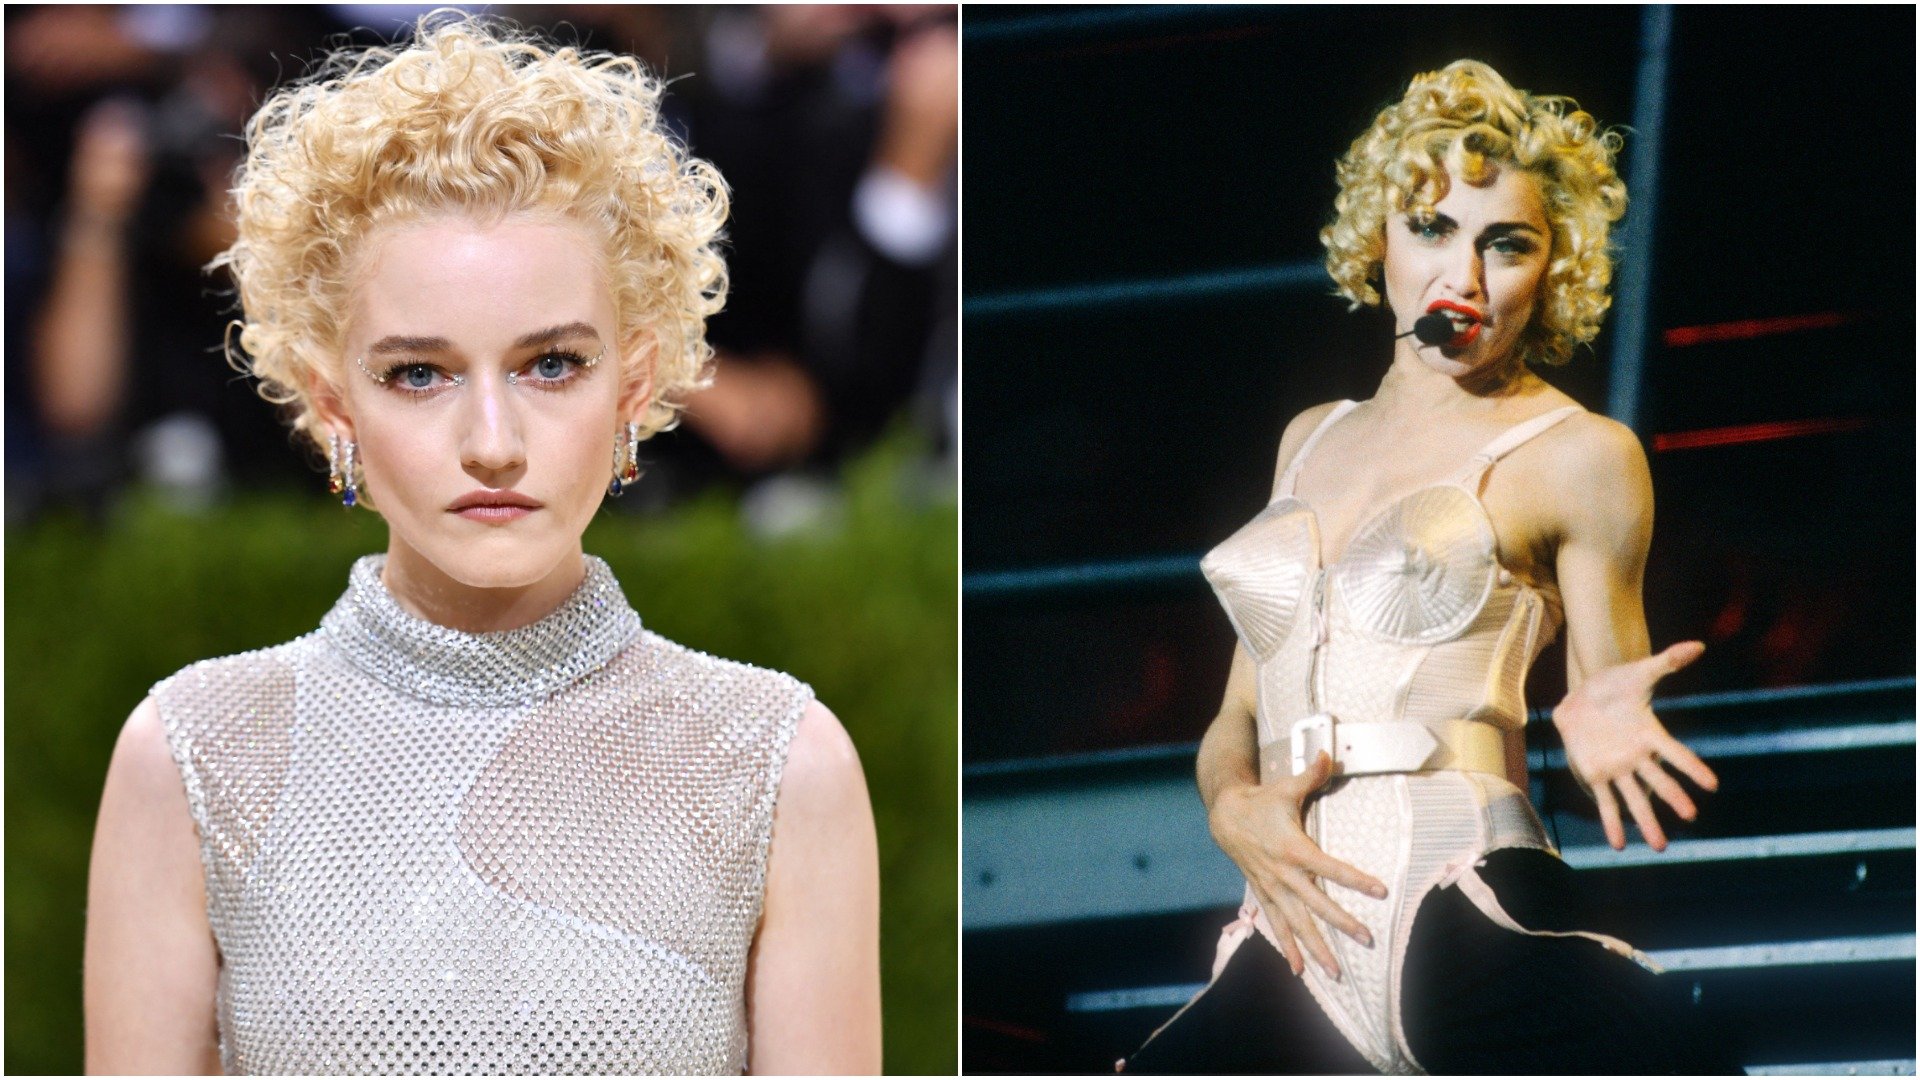 Side-by-side photos of Julia Garner in silver and with curly hair at the 2021 Met Gala and Madonna performing during her Blonde Ambition tour